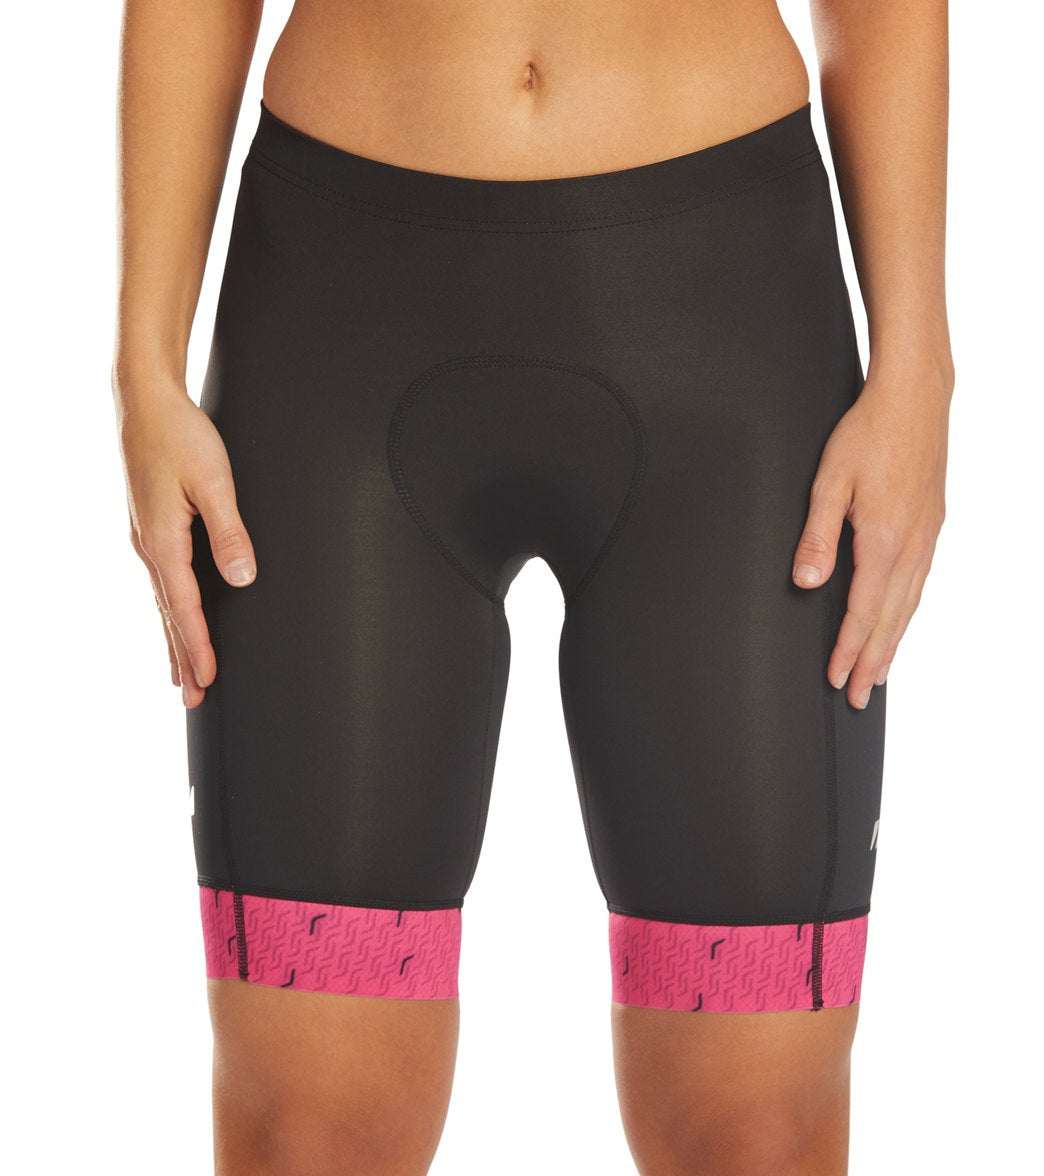 Zone3 Women's Performance Culture Cycling Shorts - Black/Coral Large Size Large Elastane/Polyamide - Swimoutlet.com